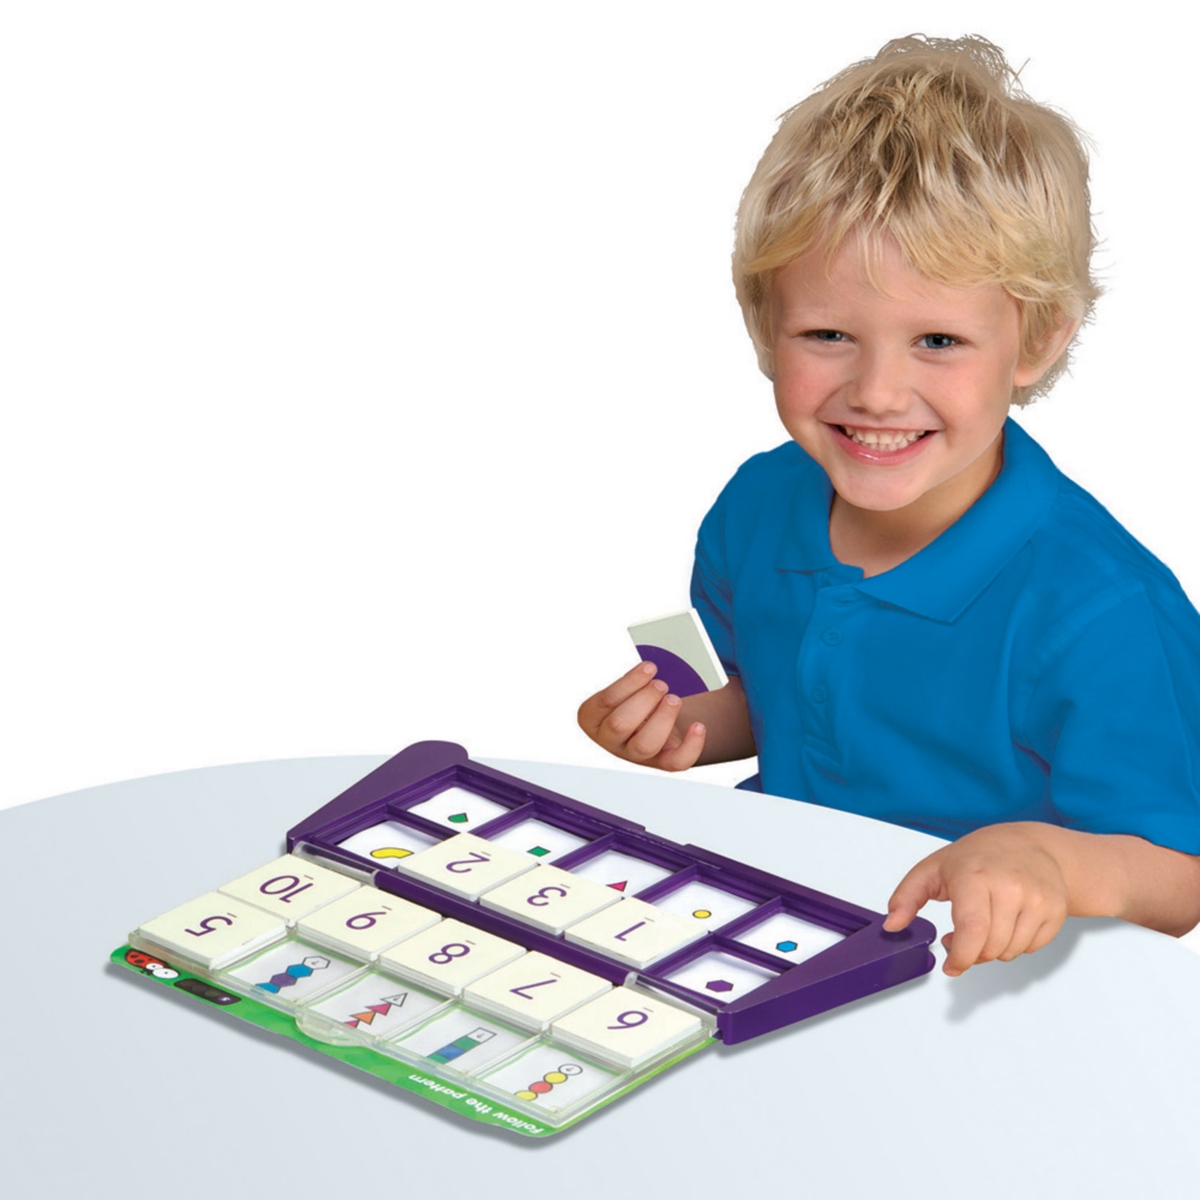 UPC 856258003009 product image for Junior Learning Smart Tray Self Correcting Learning Tool | upcitemdb.com